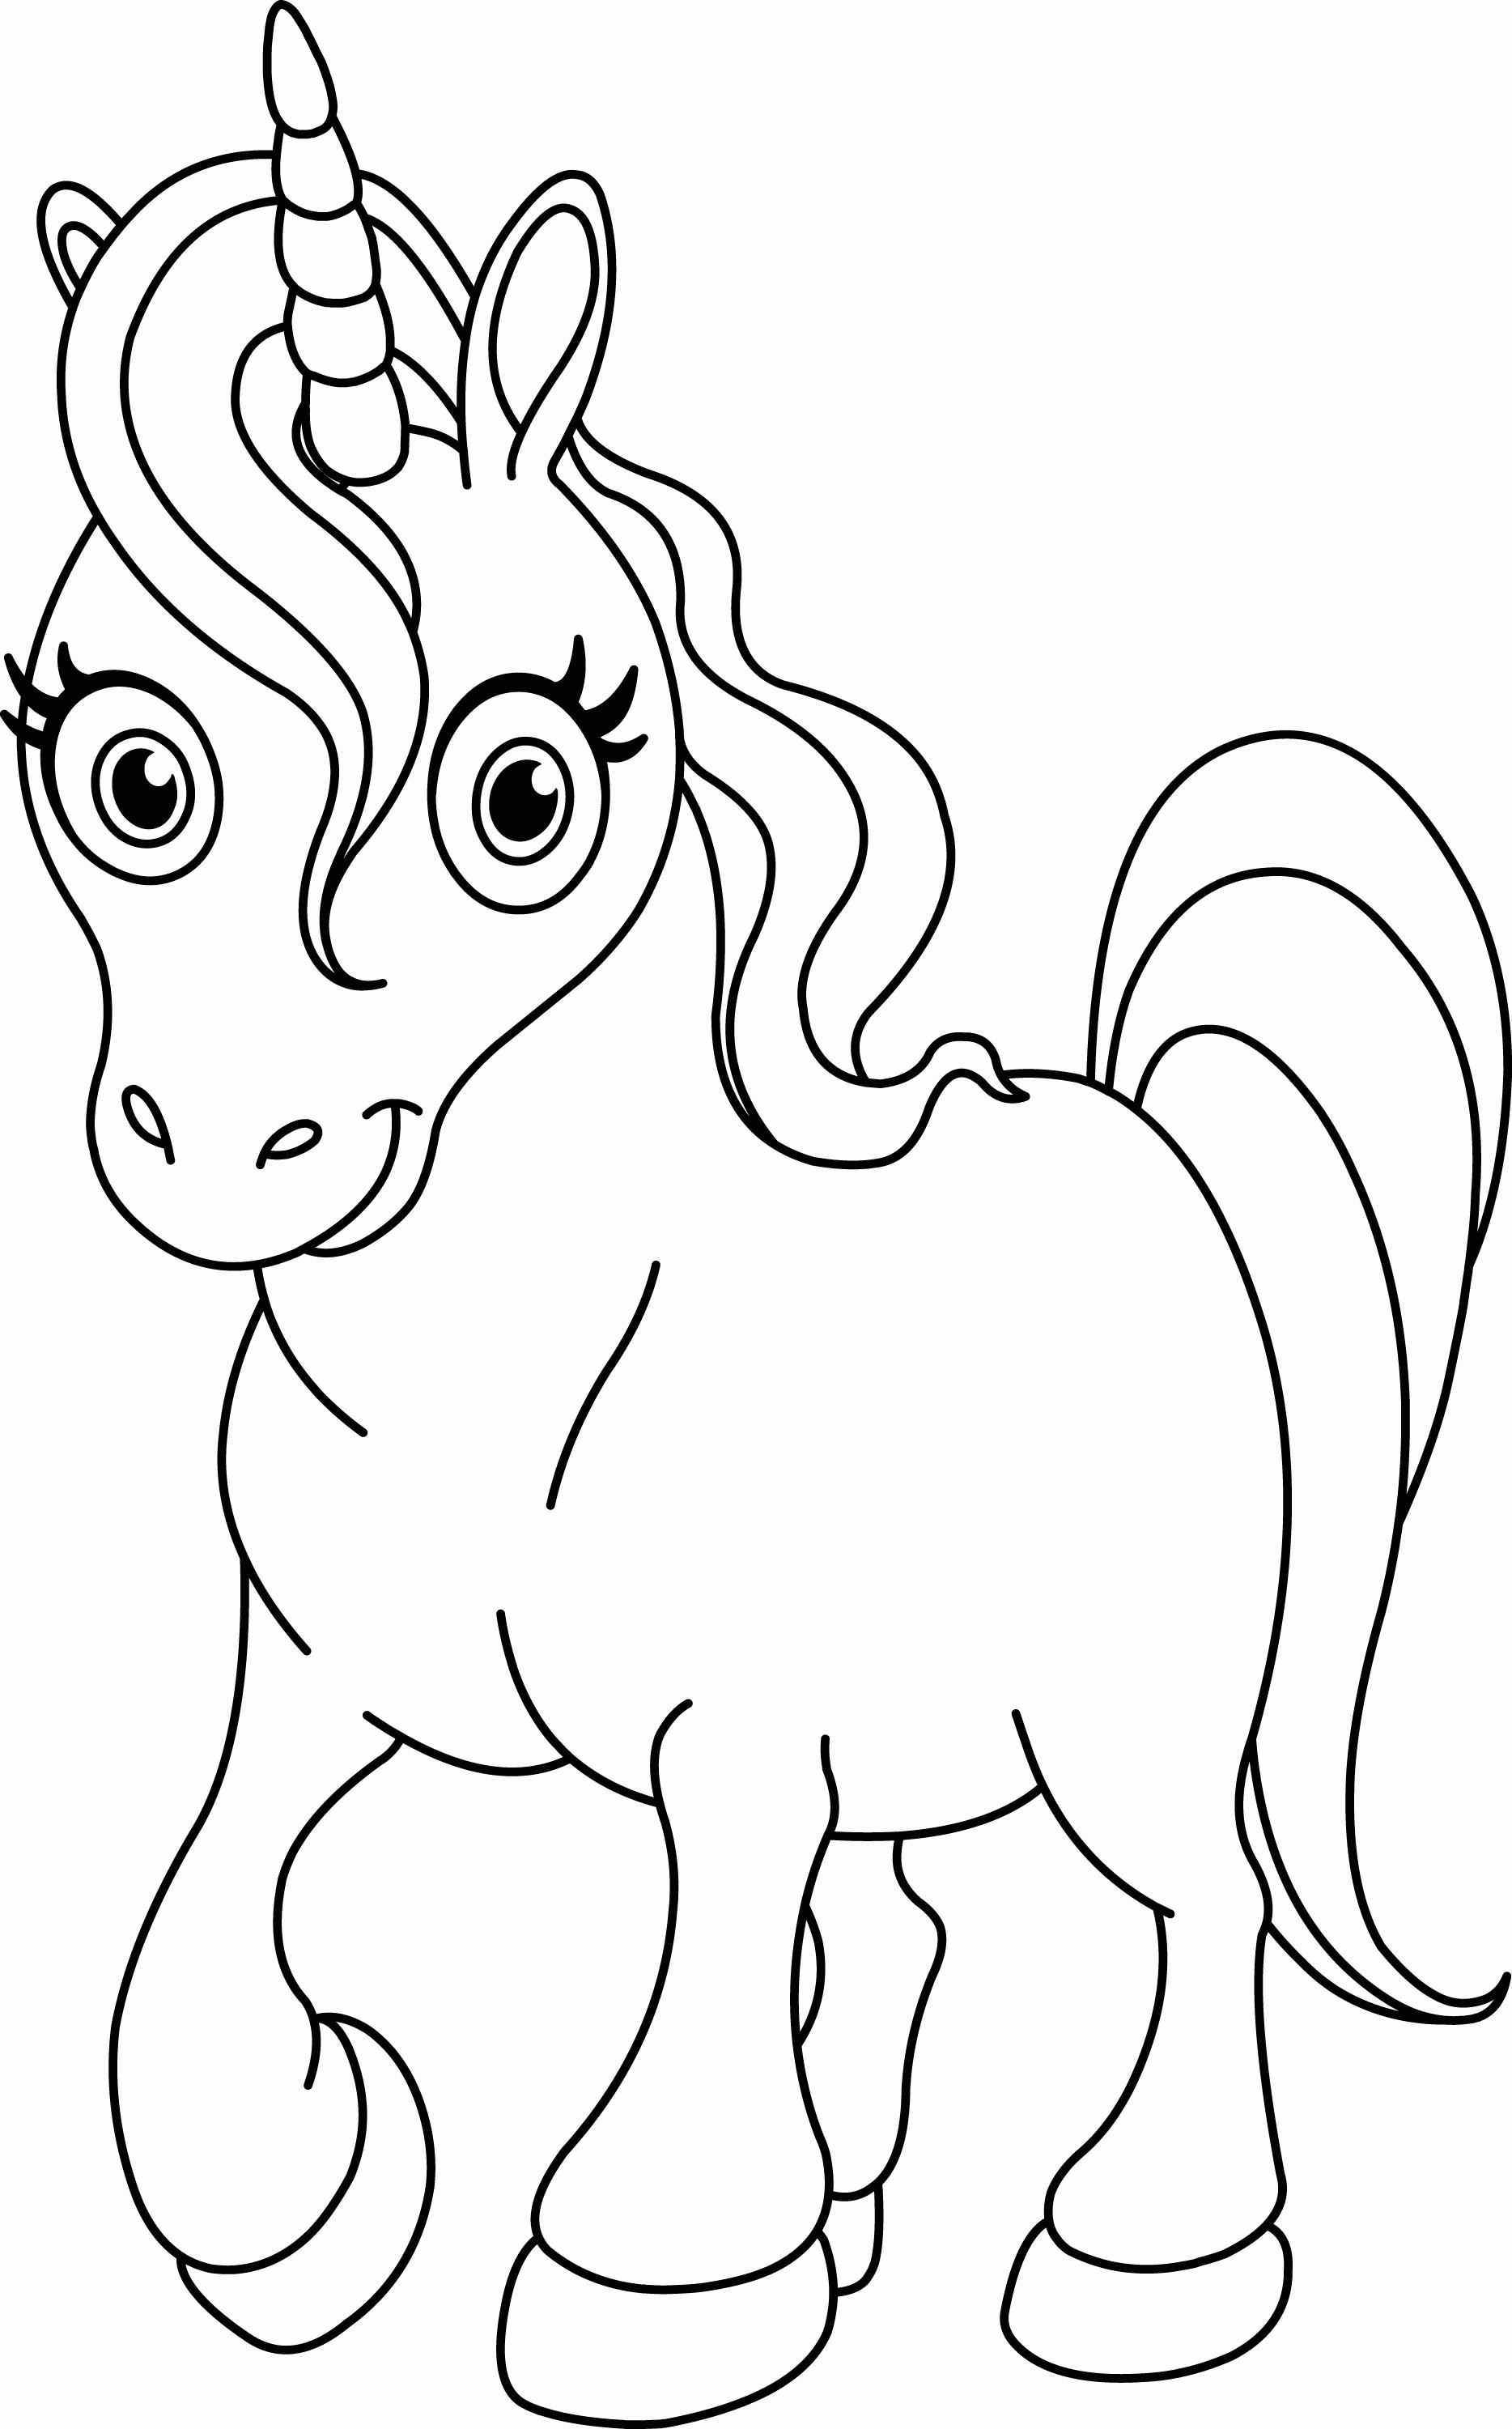 Printable Coloring Pages Unicorn
 Pink Fluffy Unicorns Dancing Rainbows Coloring Pages